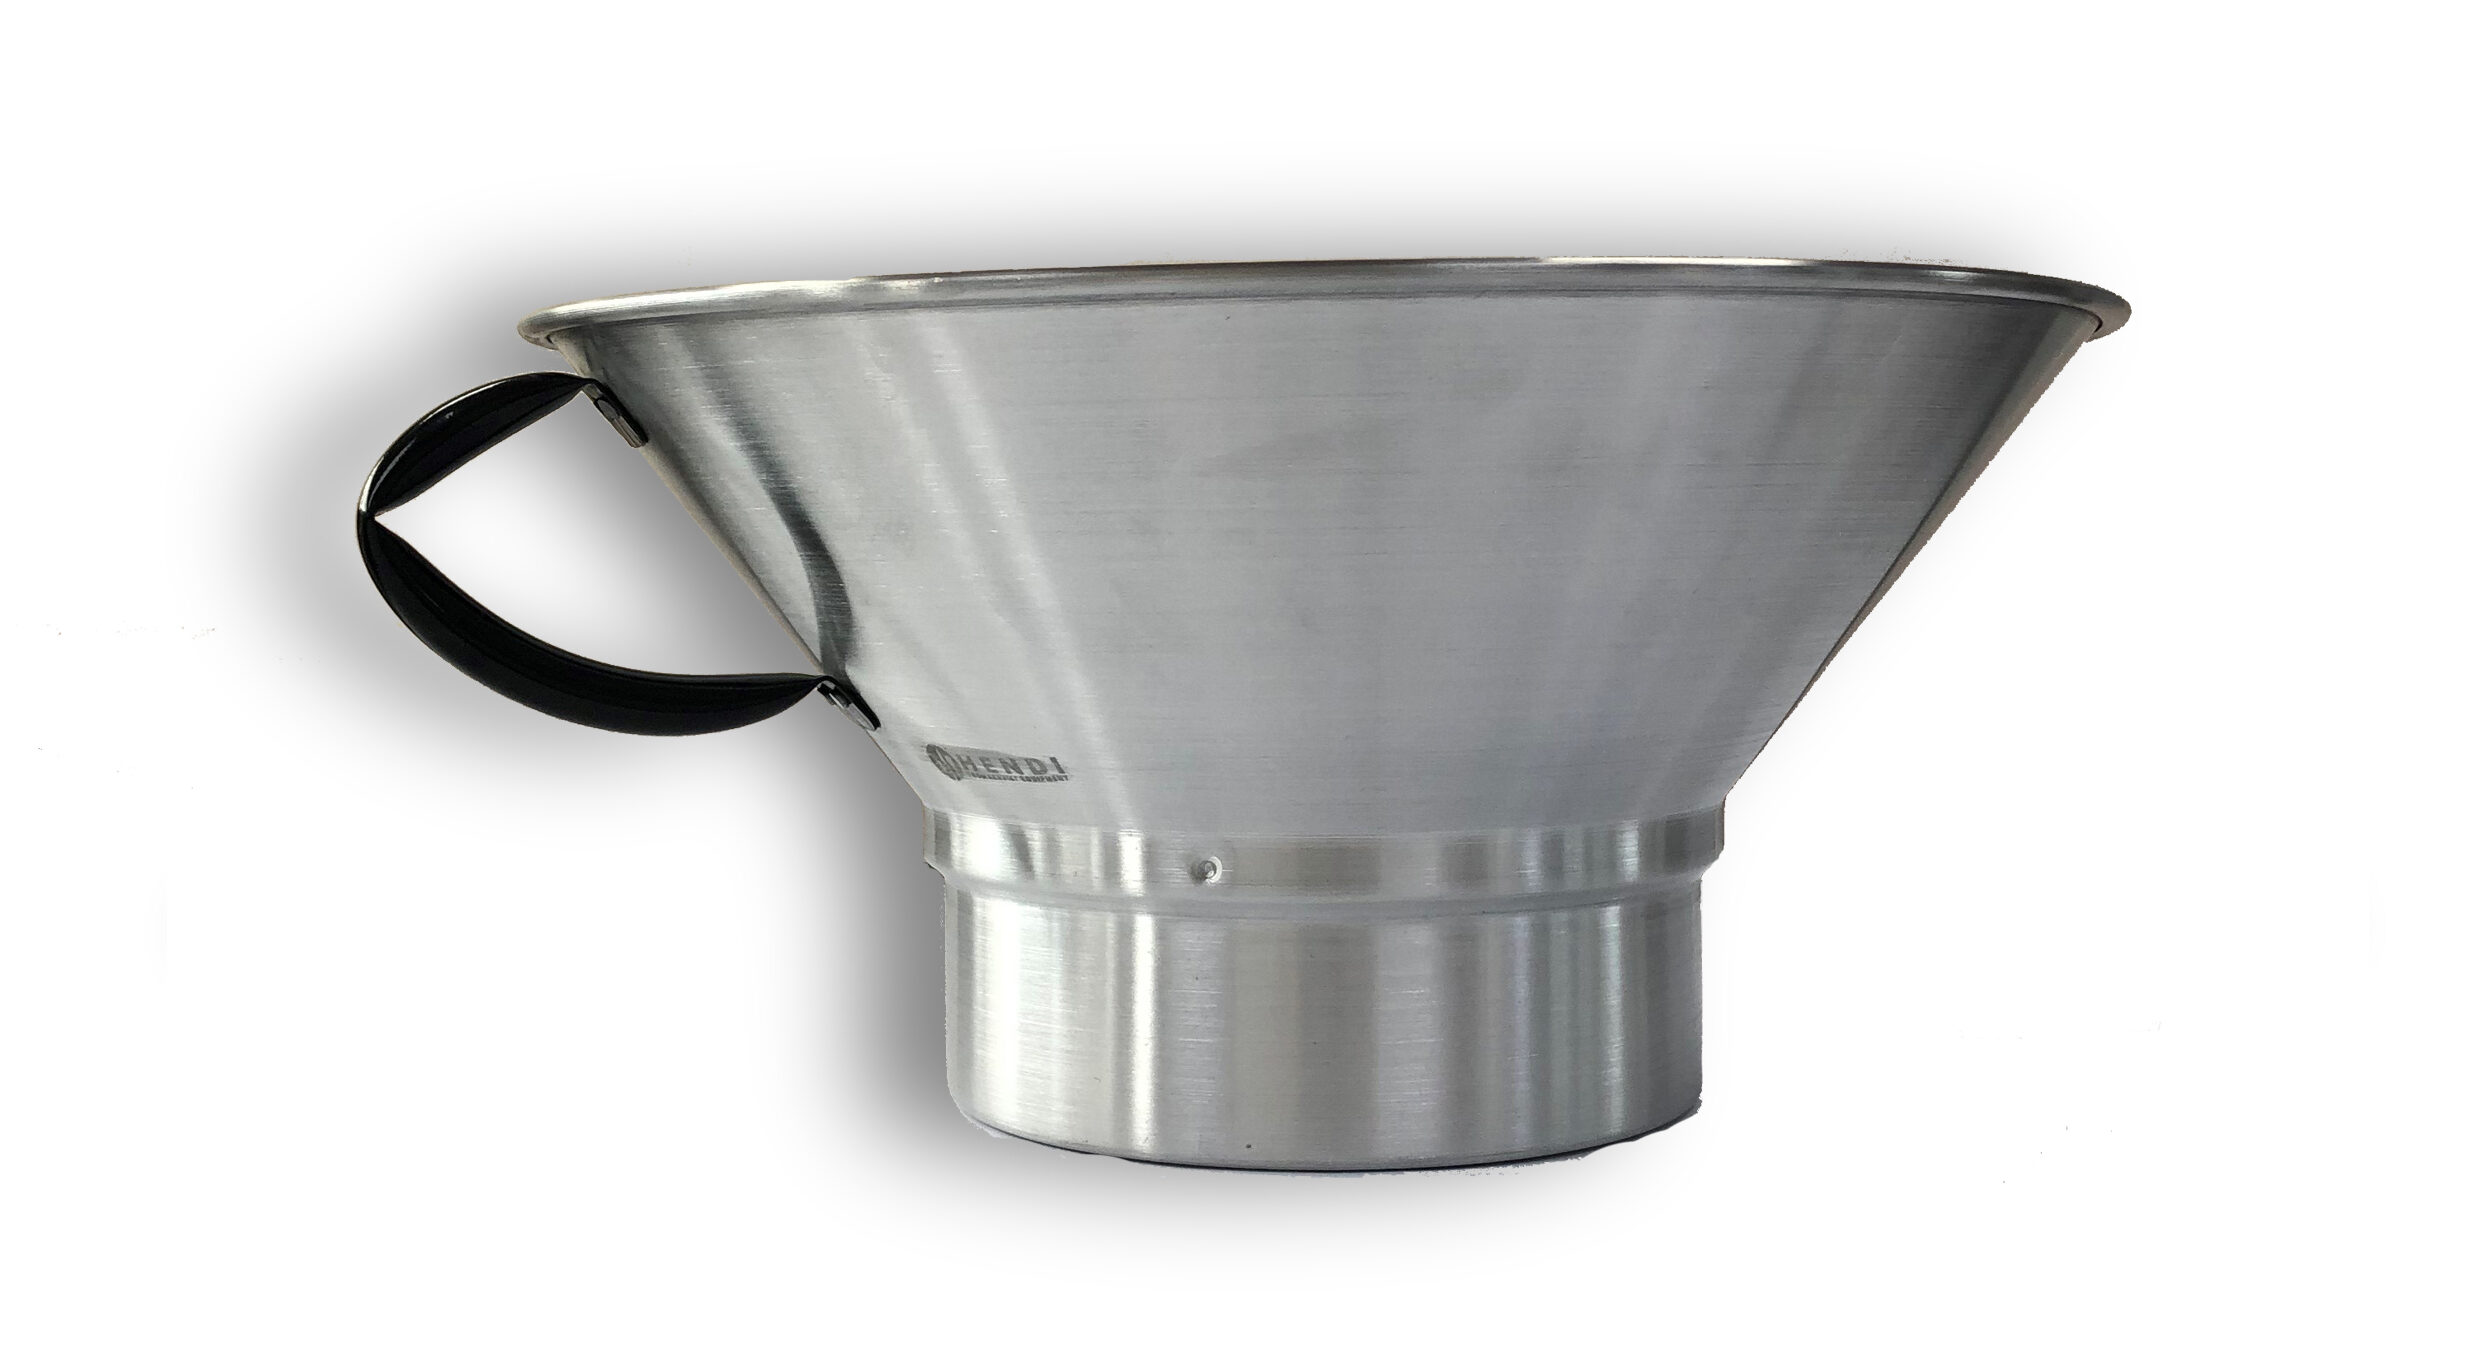 The perfect utensil for blancjing your chips is a Chip Colander